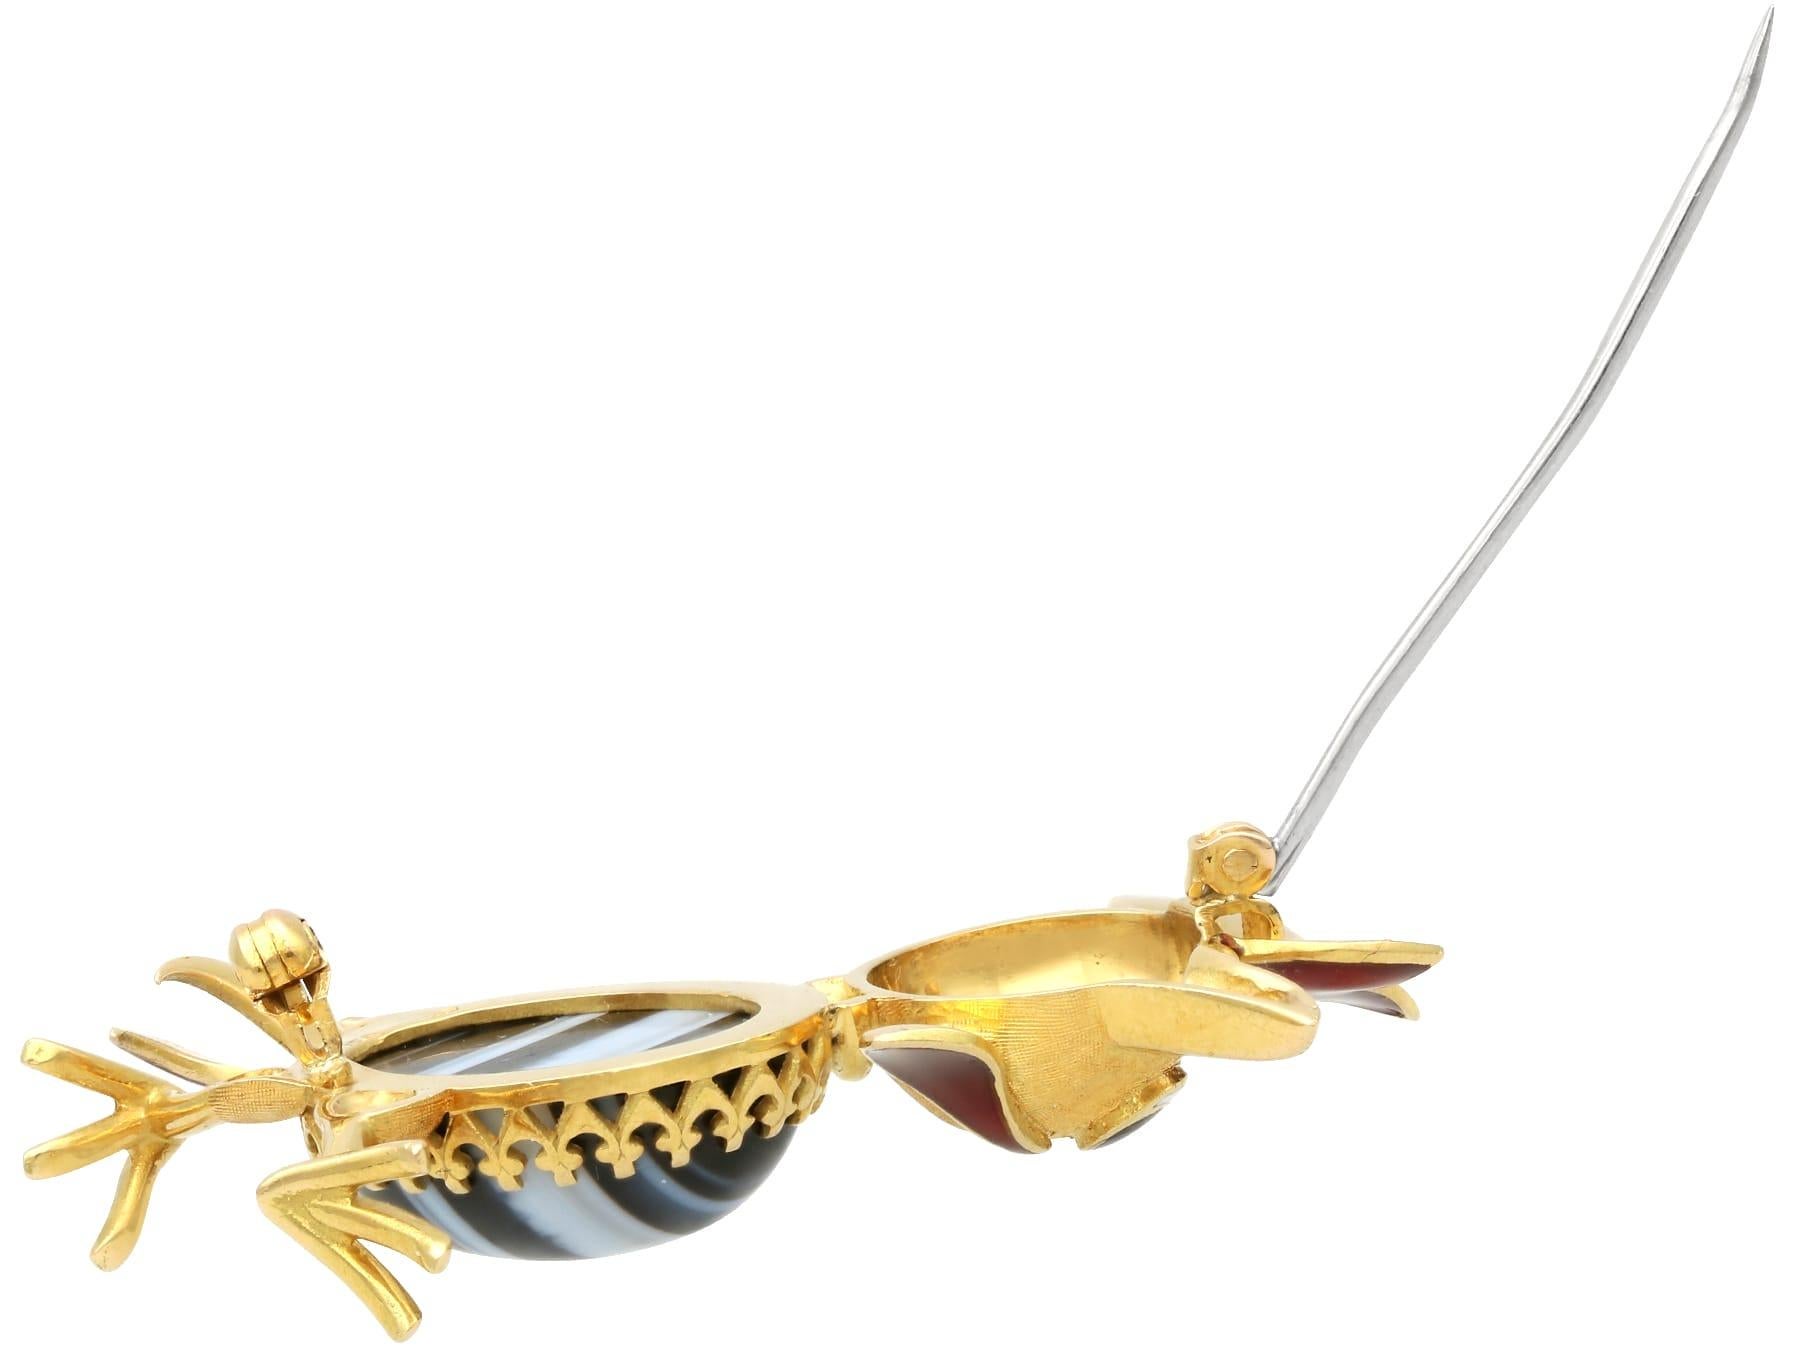 1950s Italian 11.19ct Banded Agate, Enamel and 18k Yellow Gold Cockerel Brooch For Sale 1